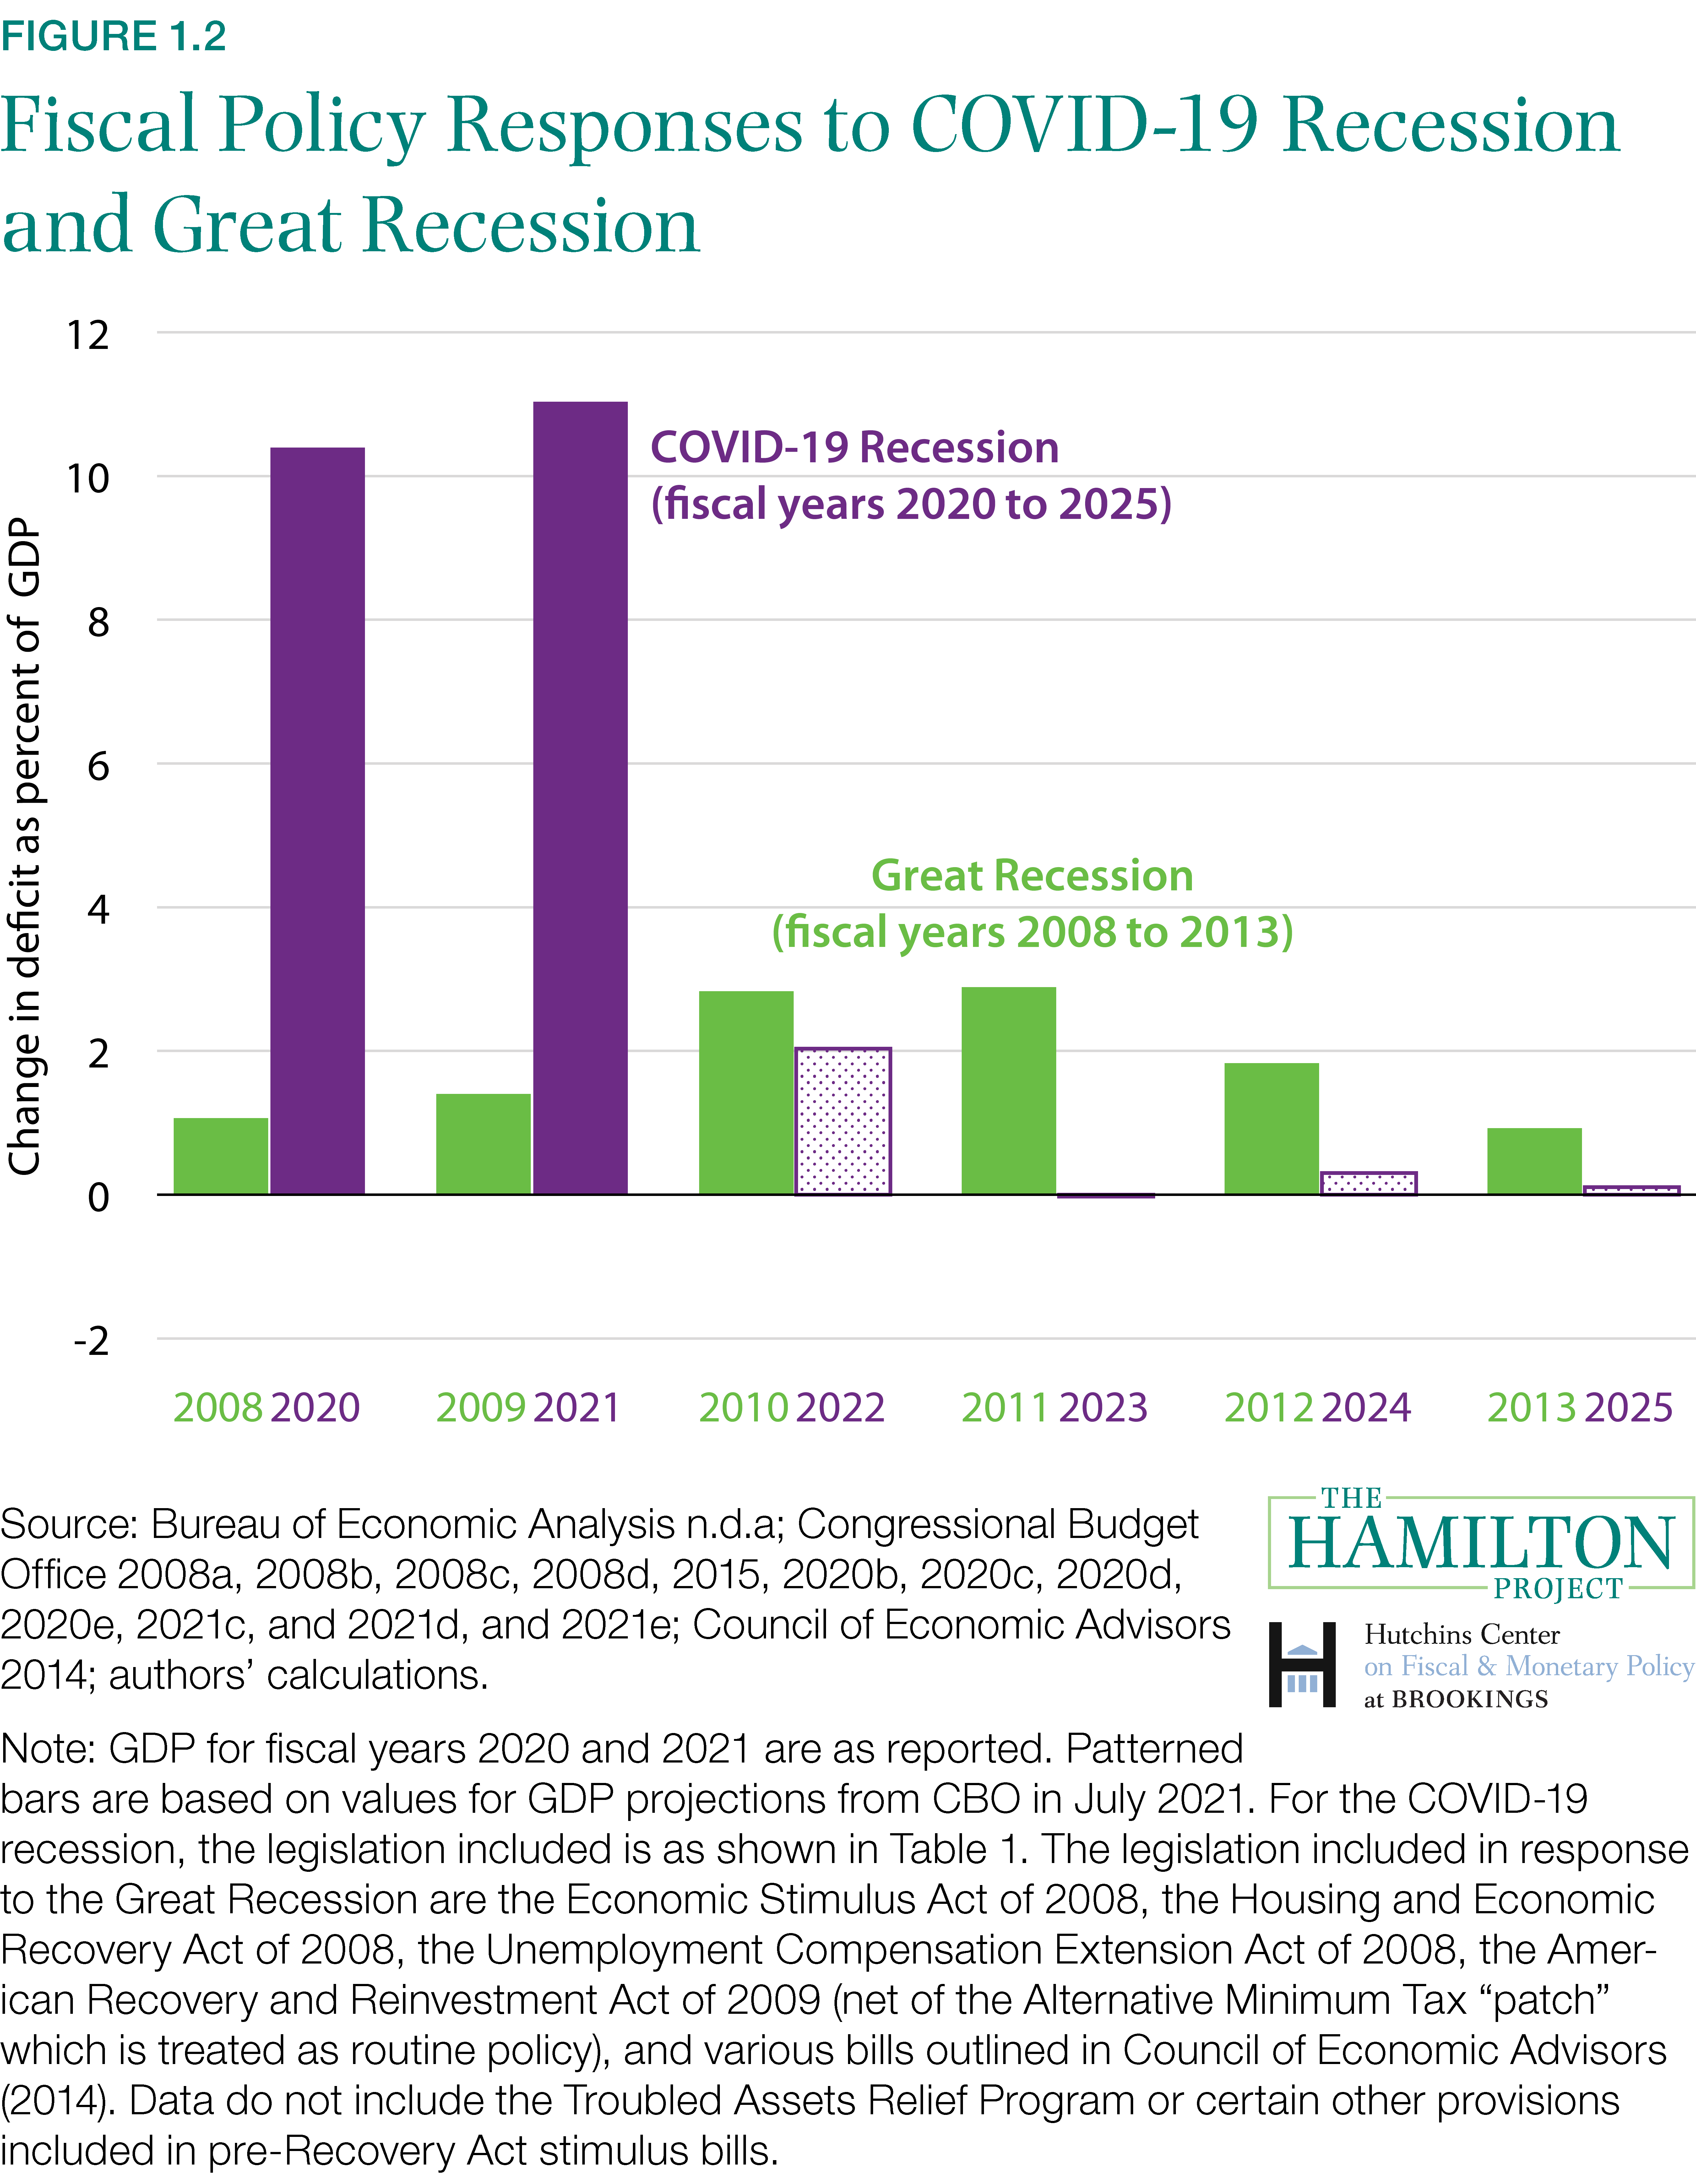 Figure illustrating fiscal policy responses to COVID-19 recession and great recession.